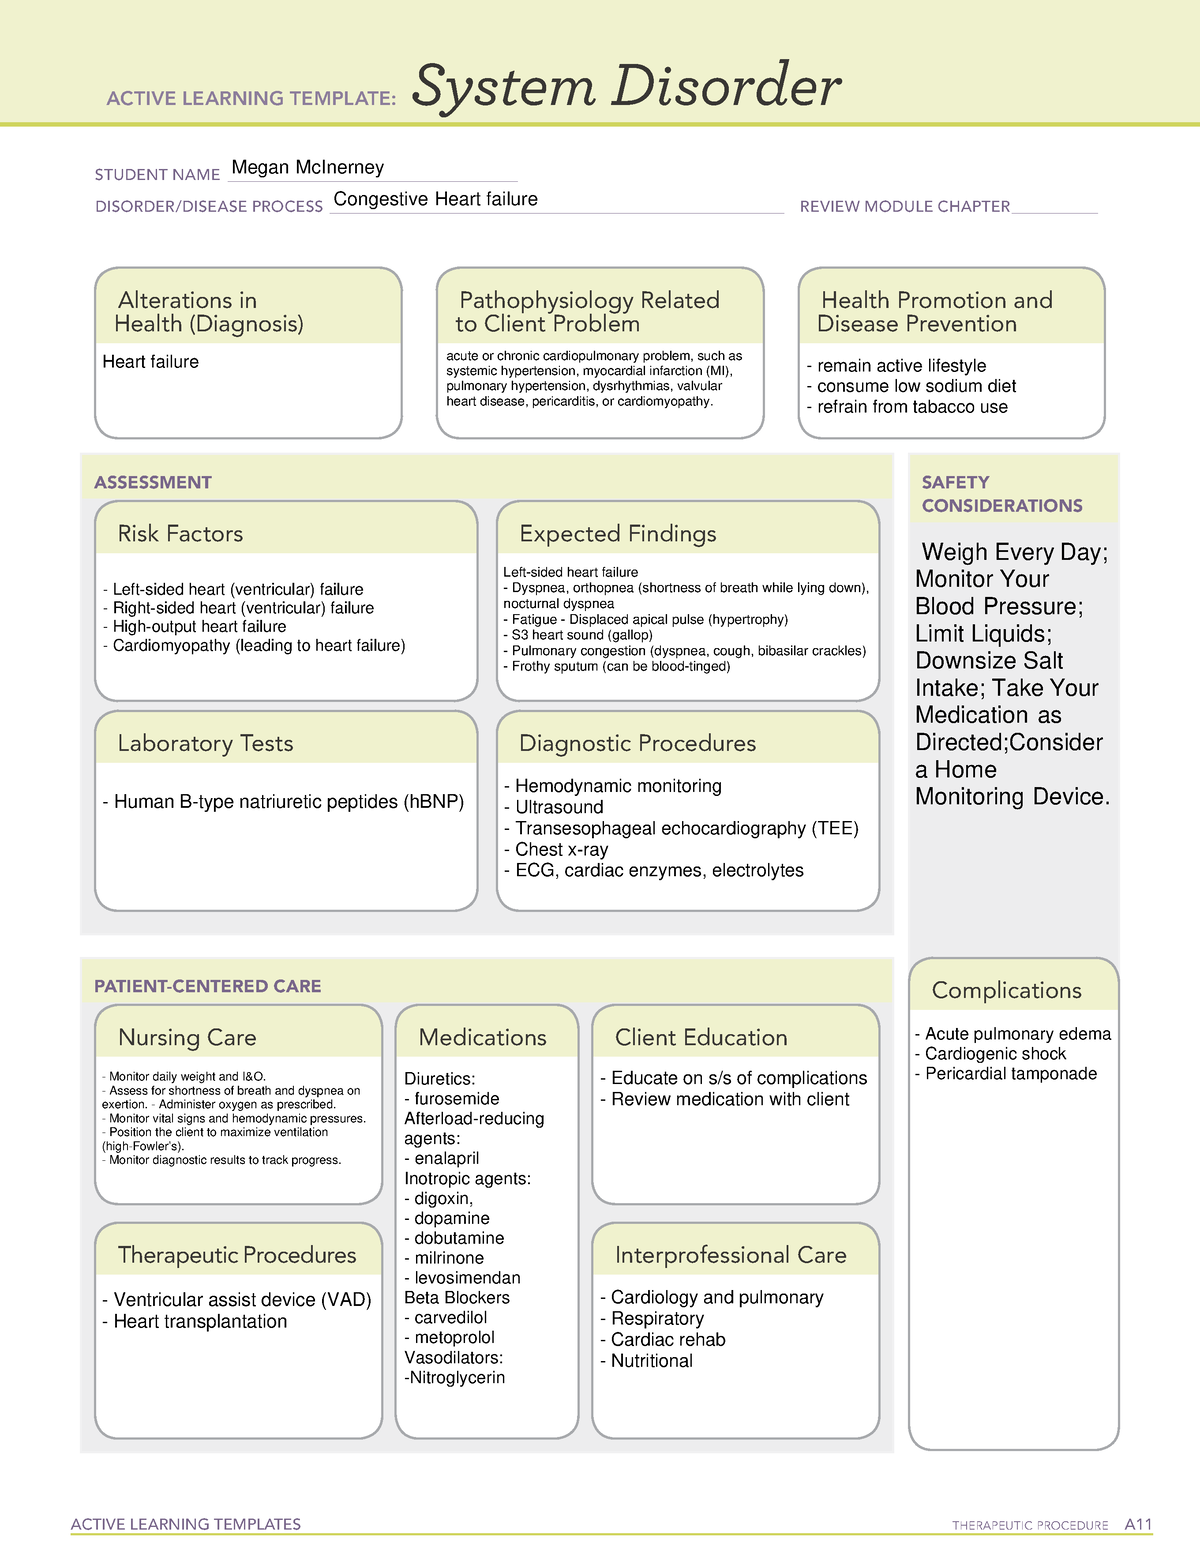 ATI System Disorder CHF ACTIVE LEARNING TEMPLATES THERAPEUTIC